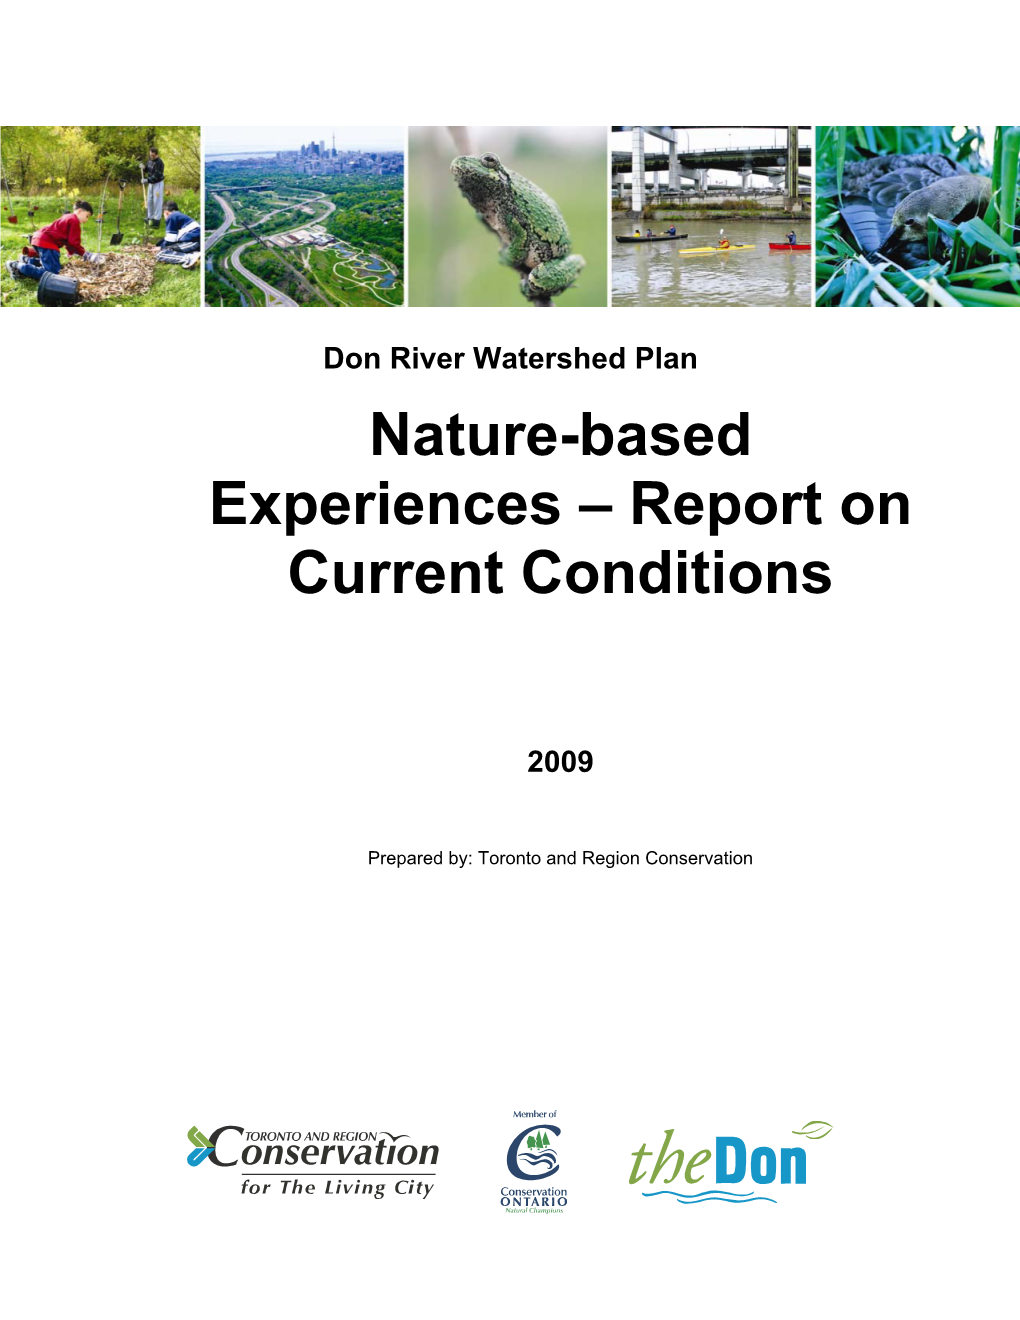 Nature-Based Experiences – Report on Current Conditions